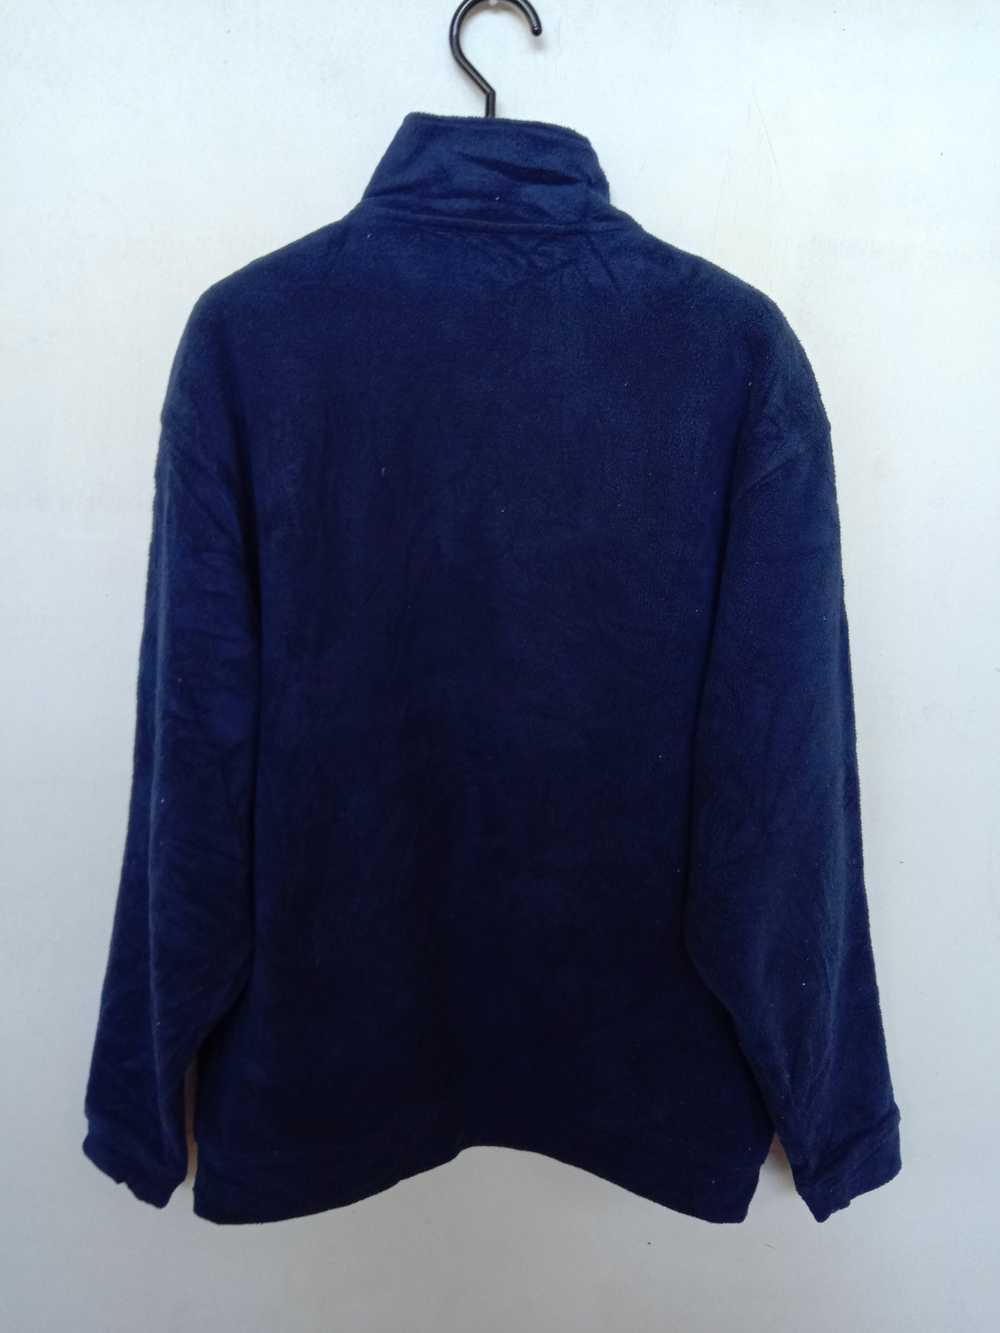 Outdoor Life Outdoor Products Plain Sweater Fleece - image 9